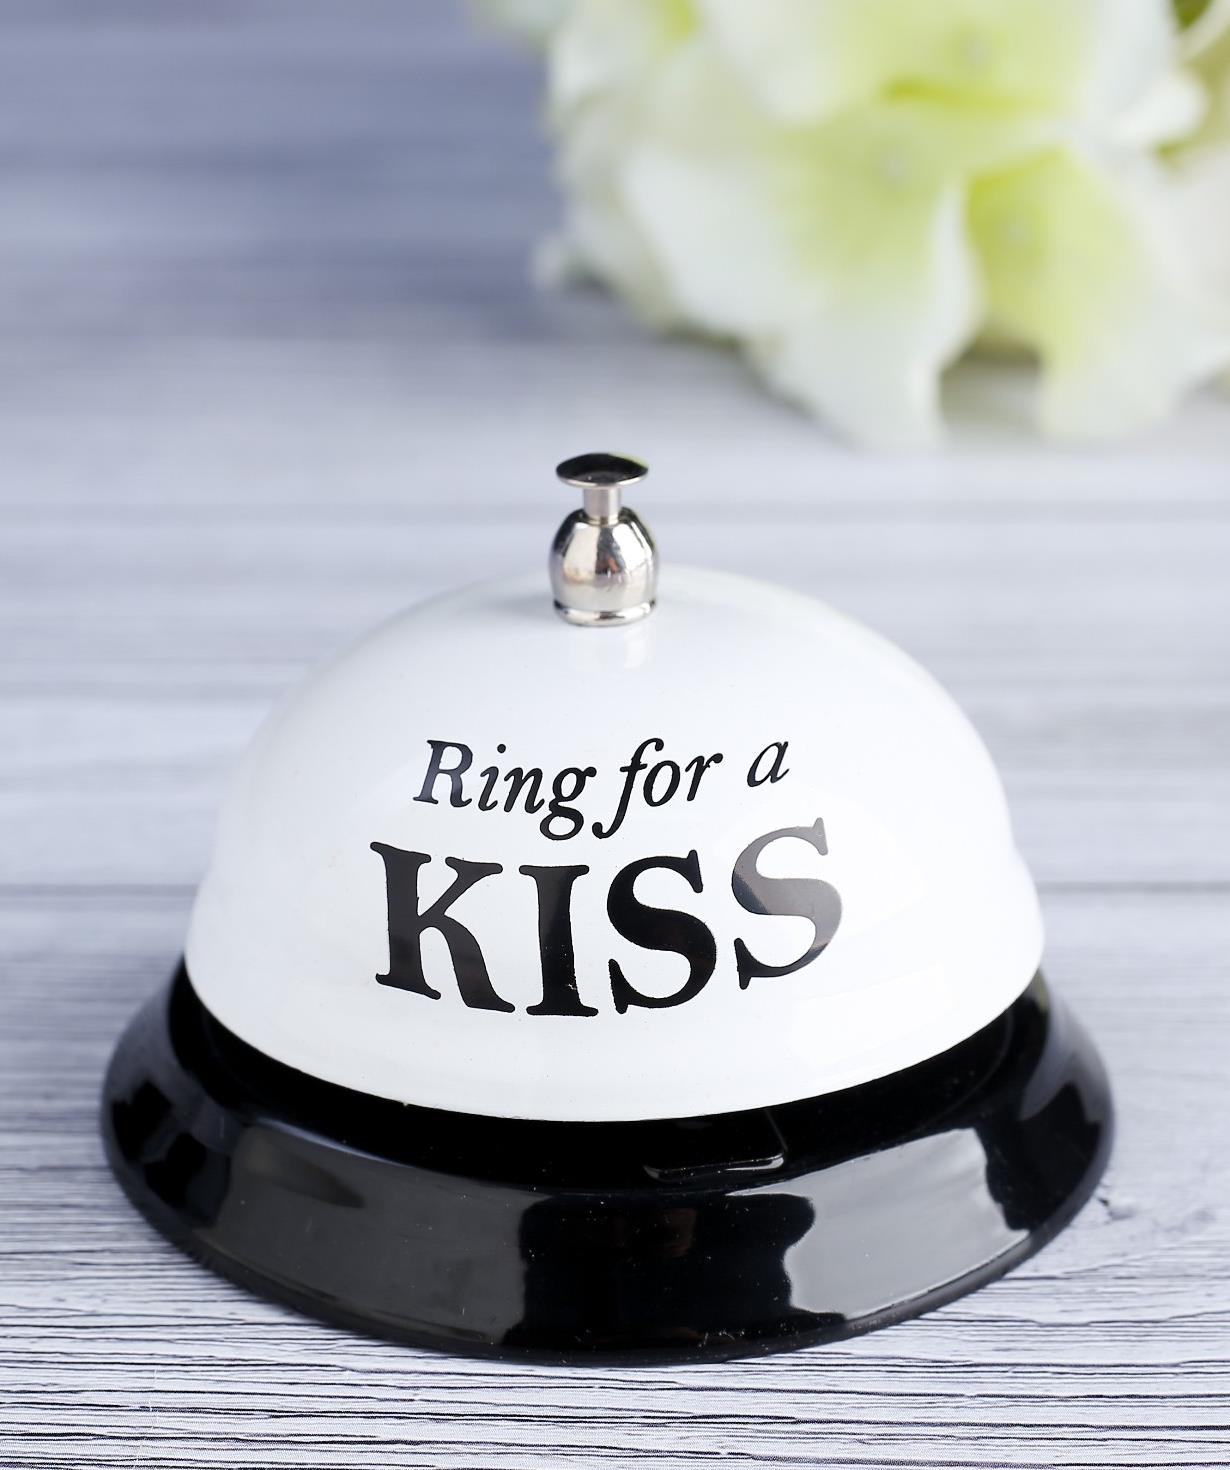 Table bell `Jpit.am` Ring for a kiss Jpit.am